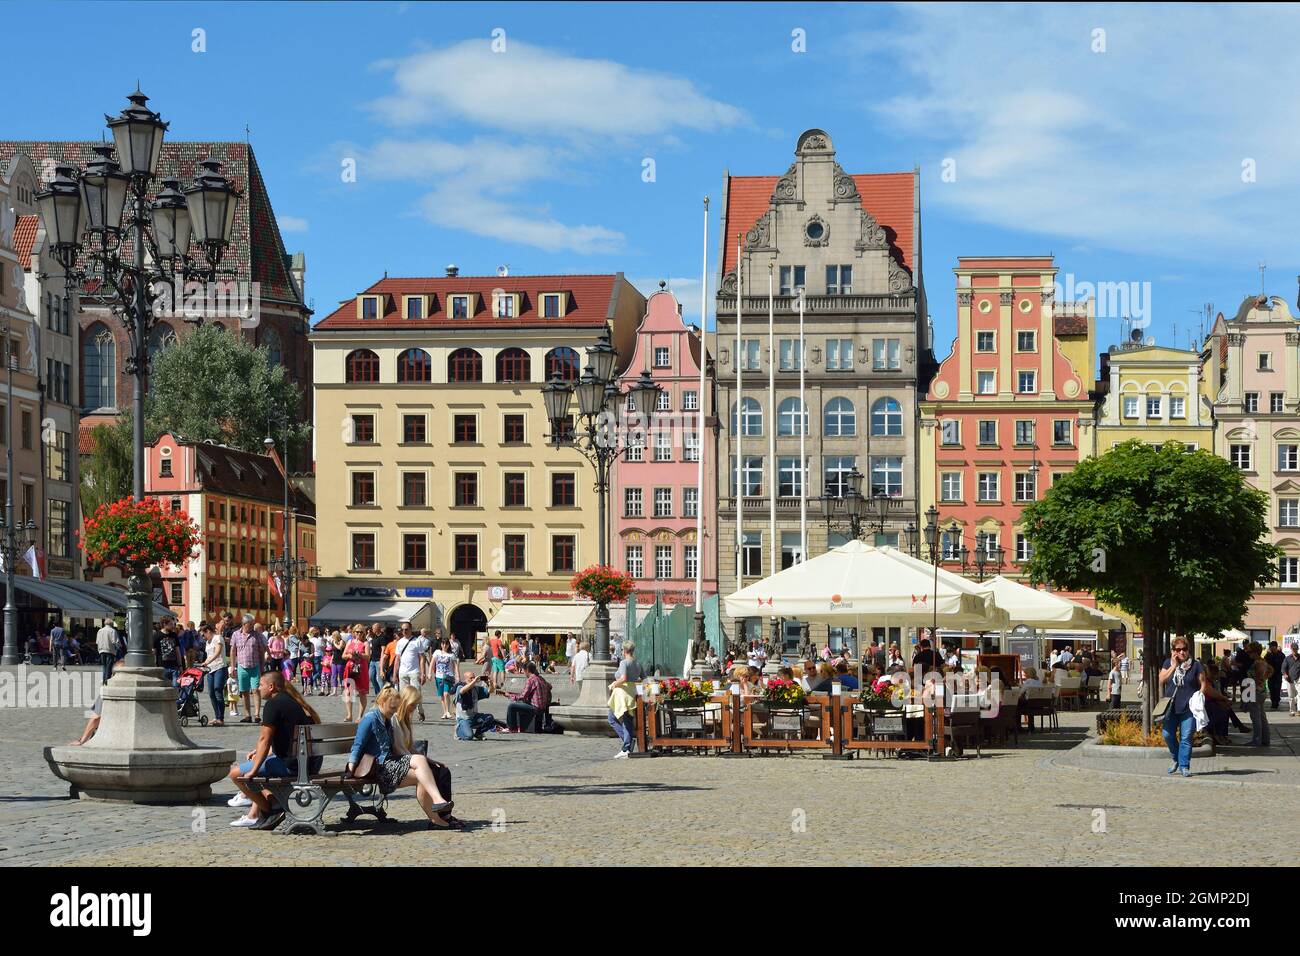 Market Square in the historical Old Town of Wroclaw - Poland. Stock Photo